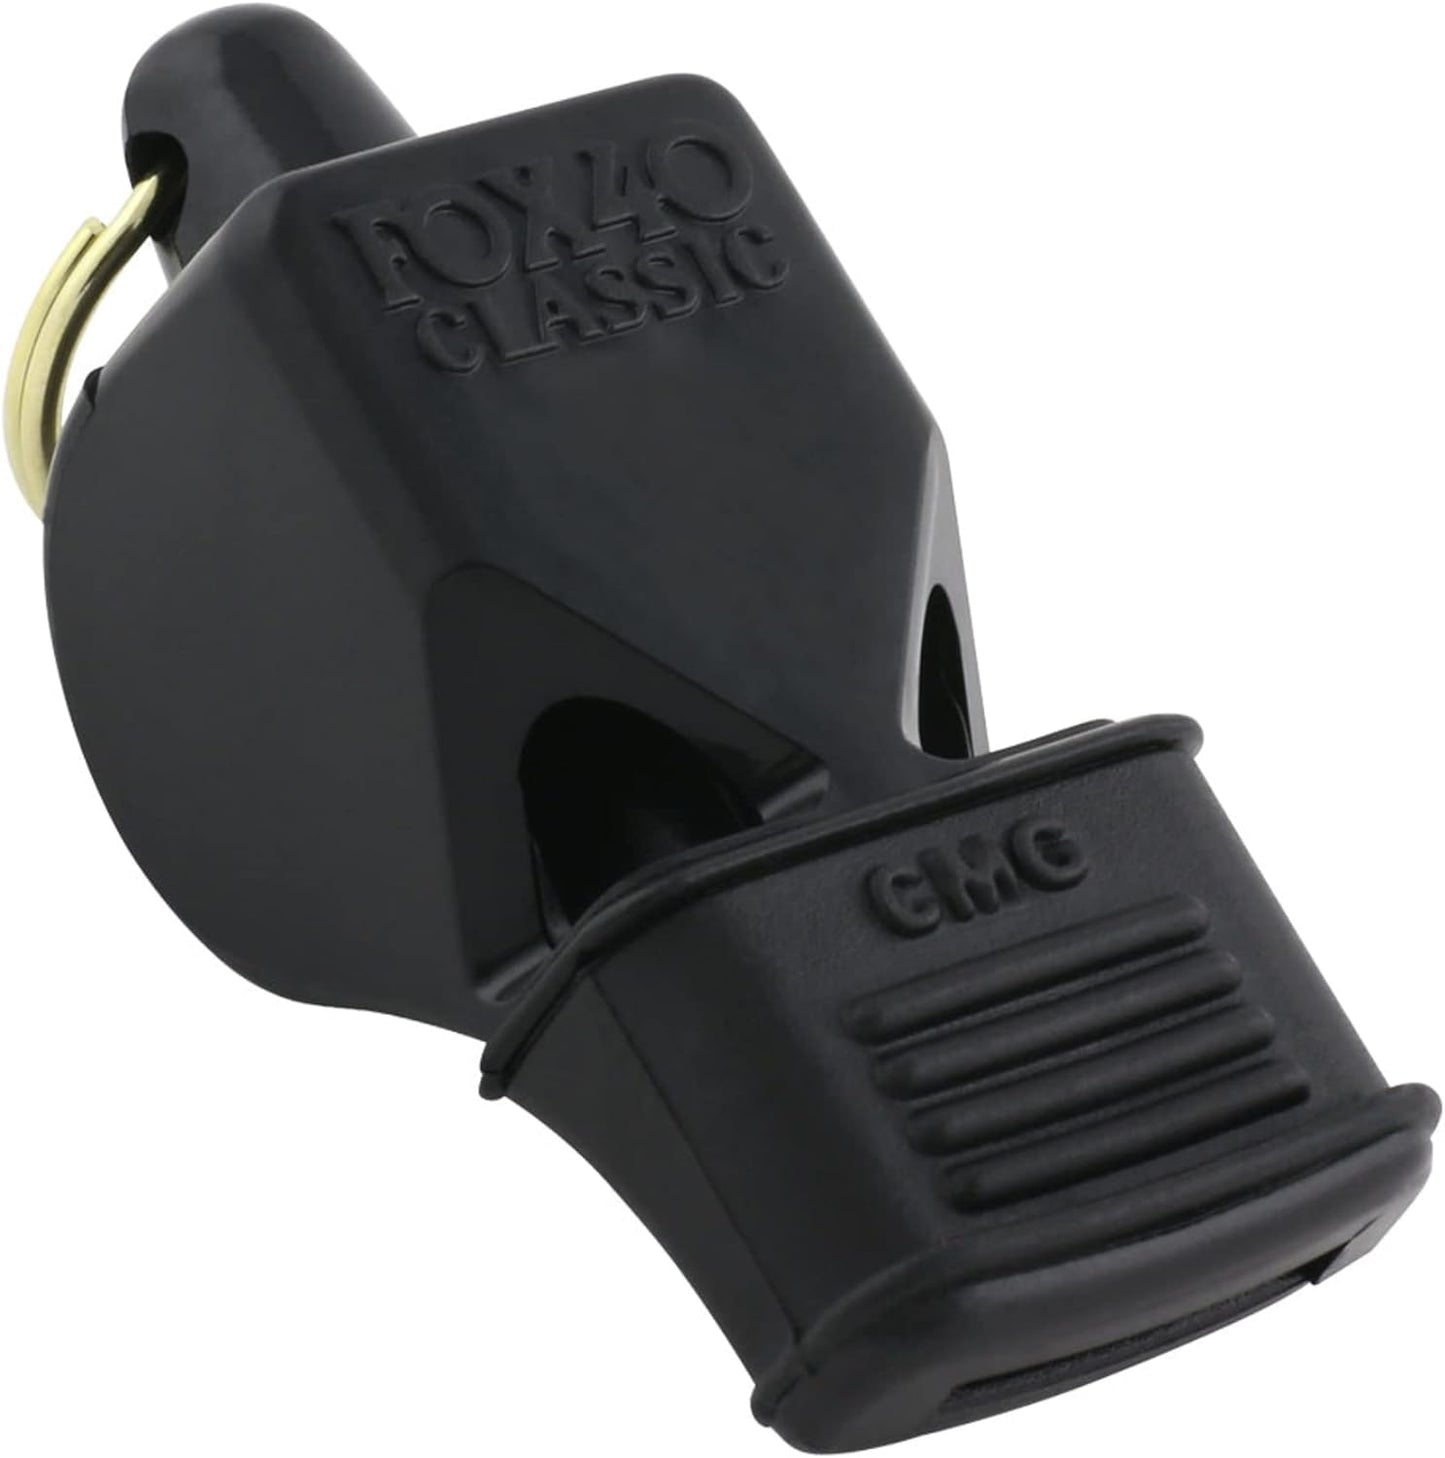 Fox 40 CMG Whistle with Cushioned Mouth Grip #9600